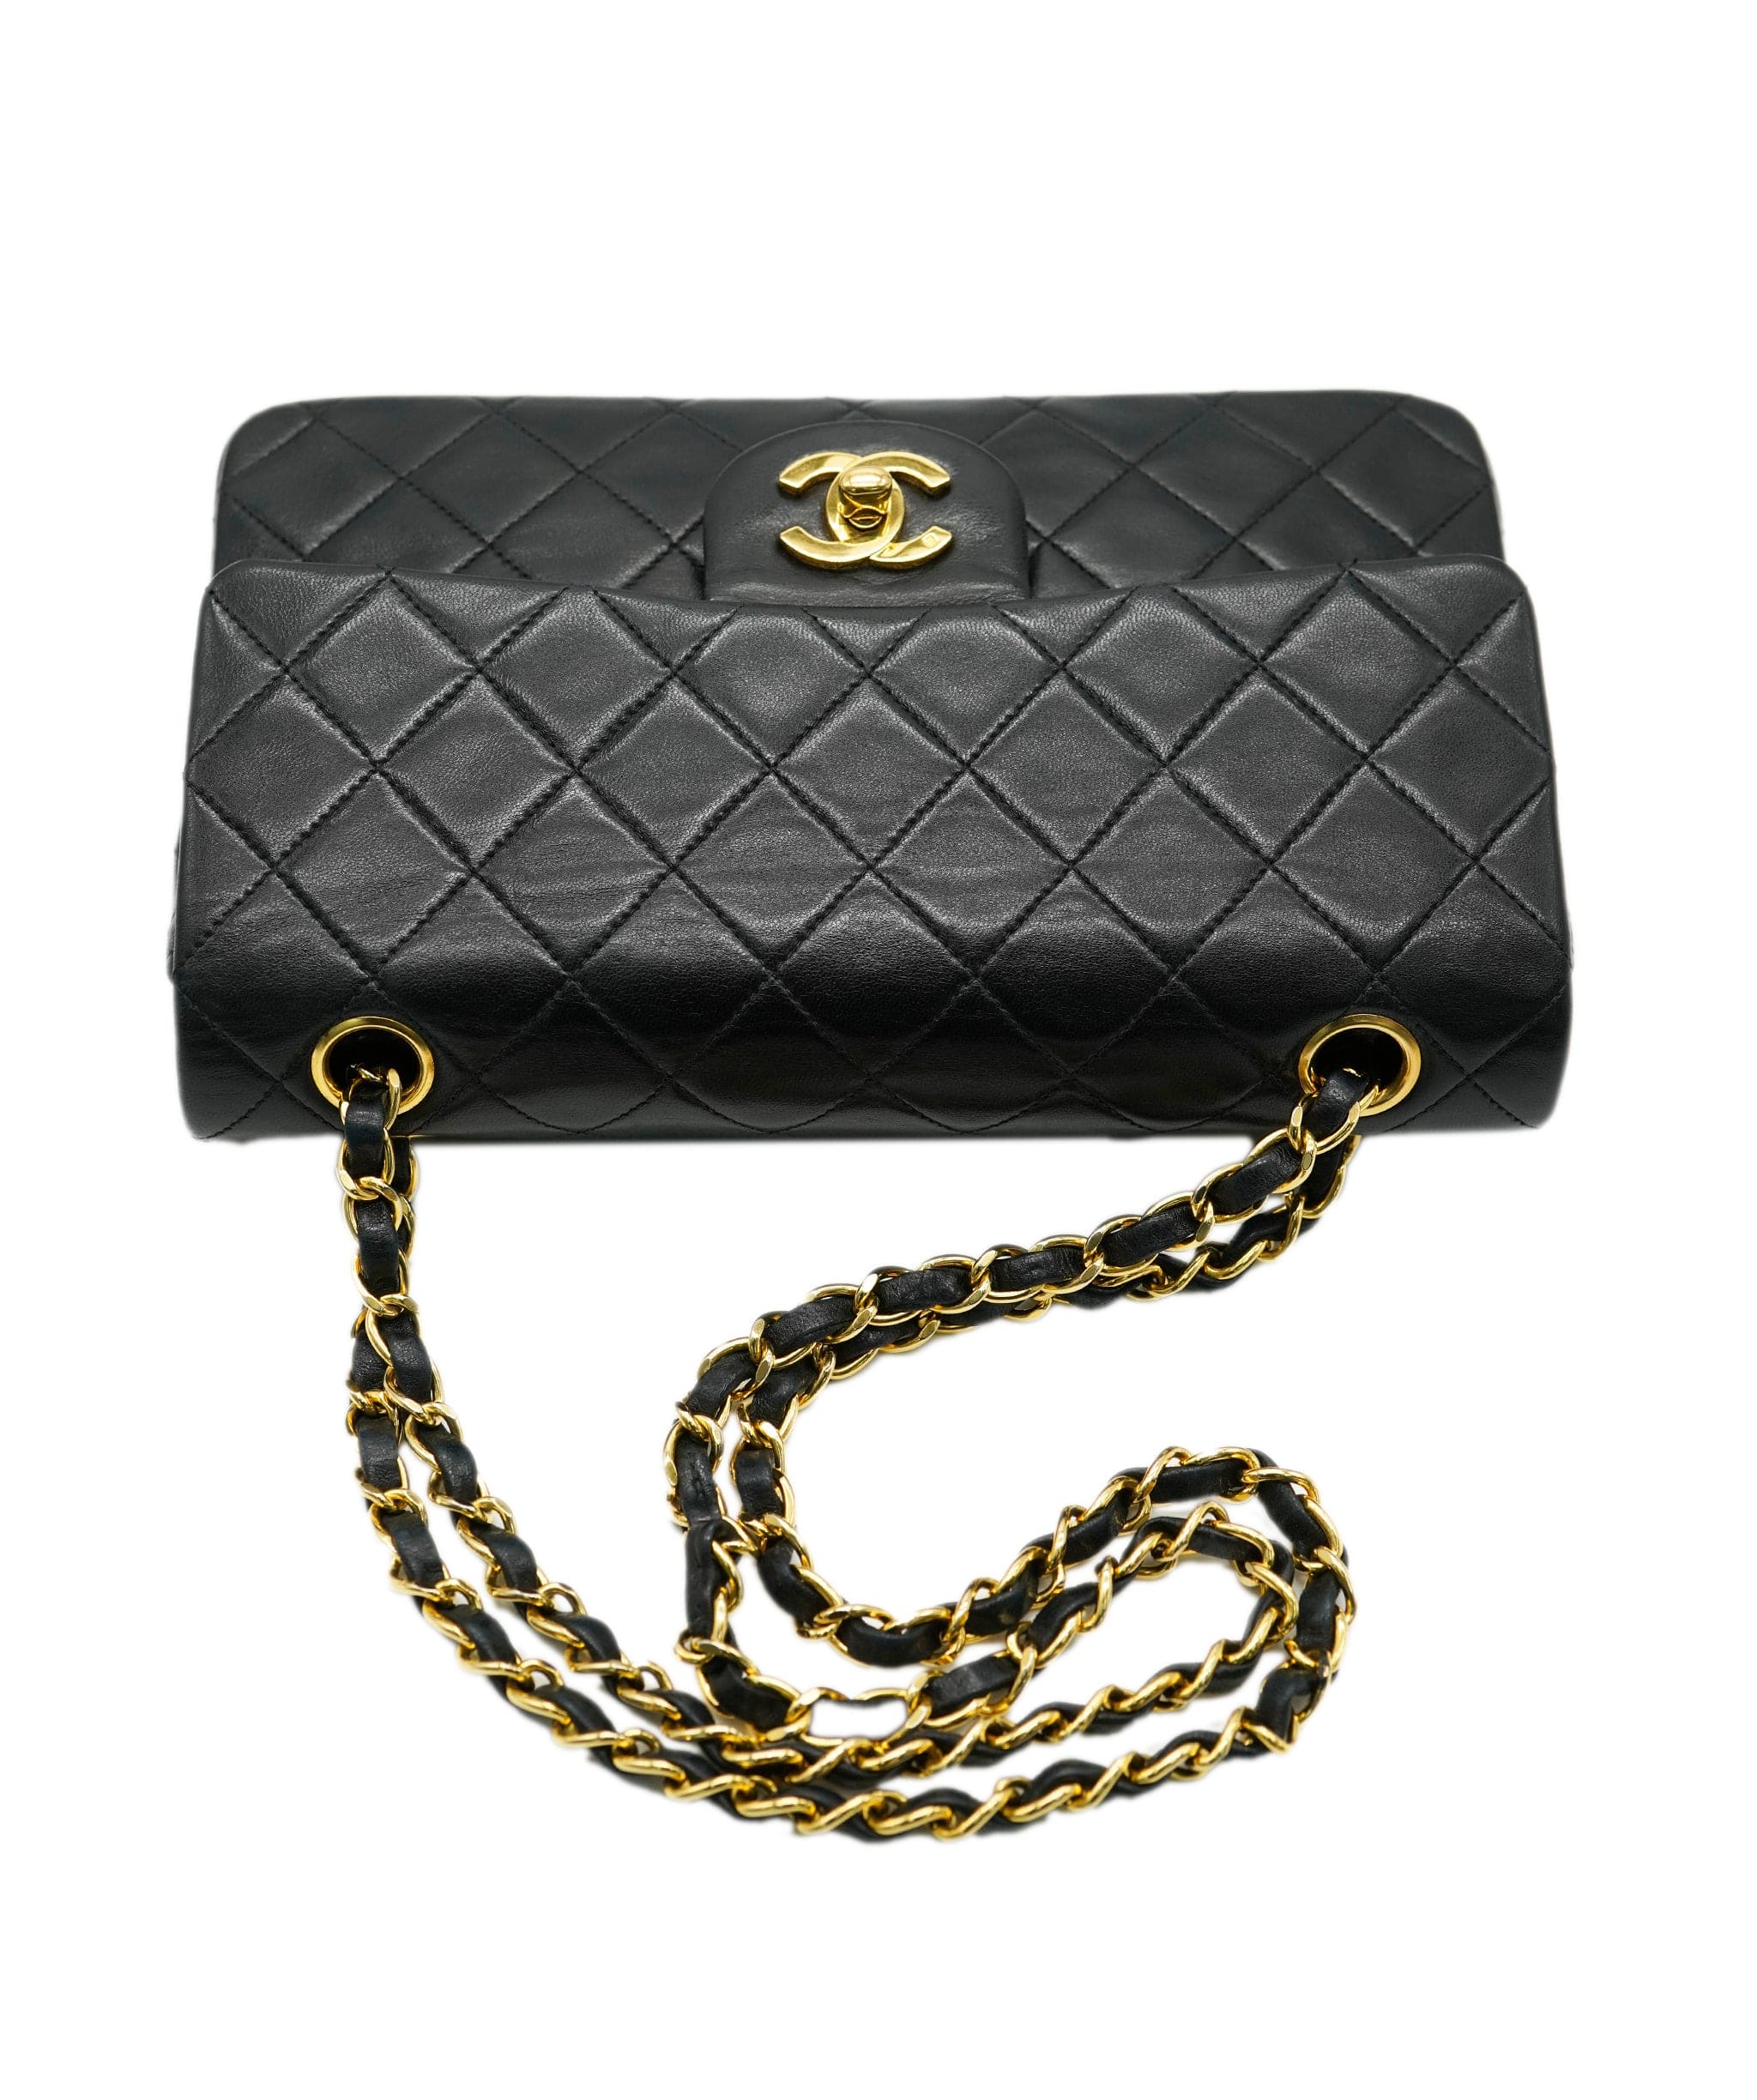 Chanel Chanel Vintage Classic Flap Small Black Lambskin GHW #4 ASL10627